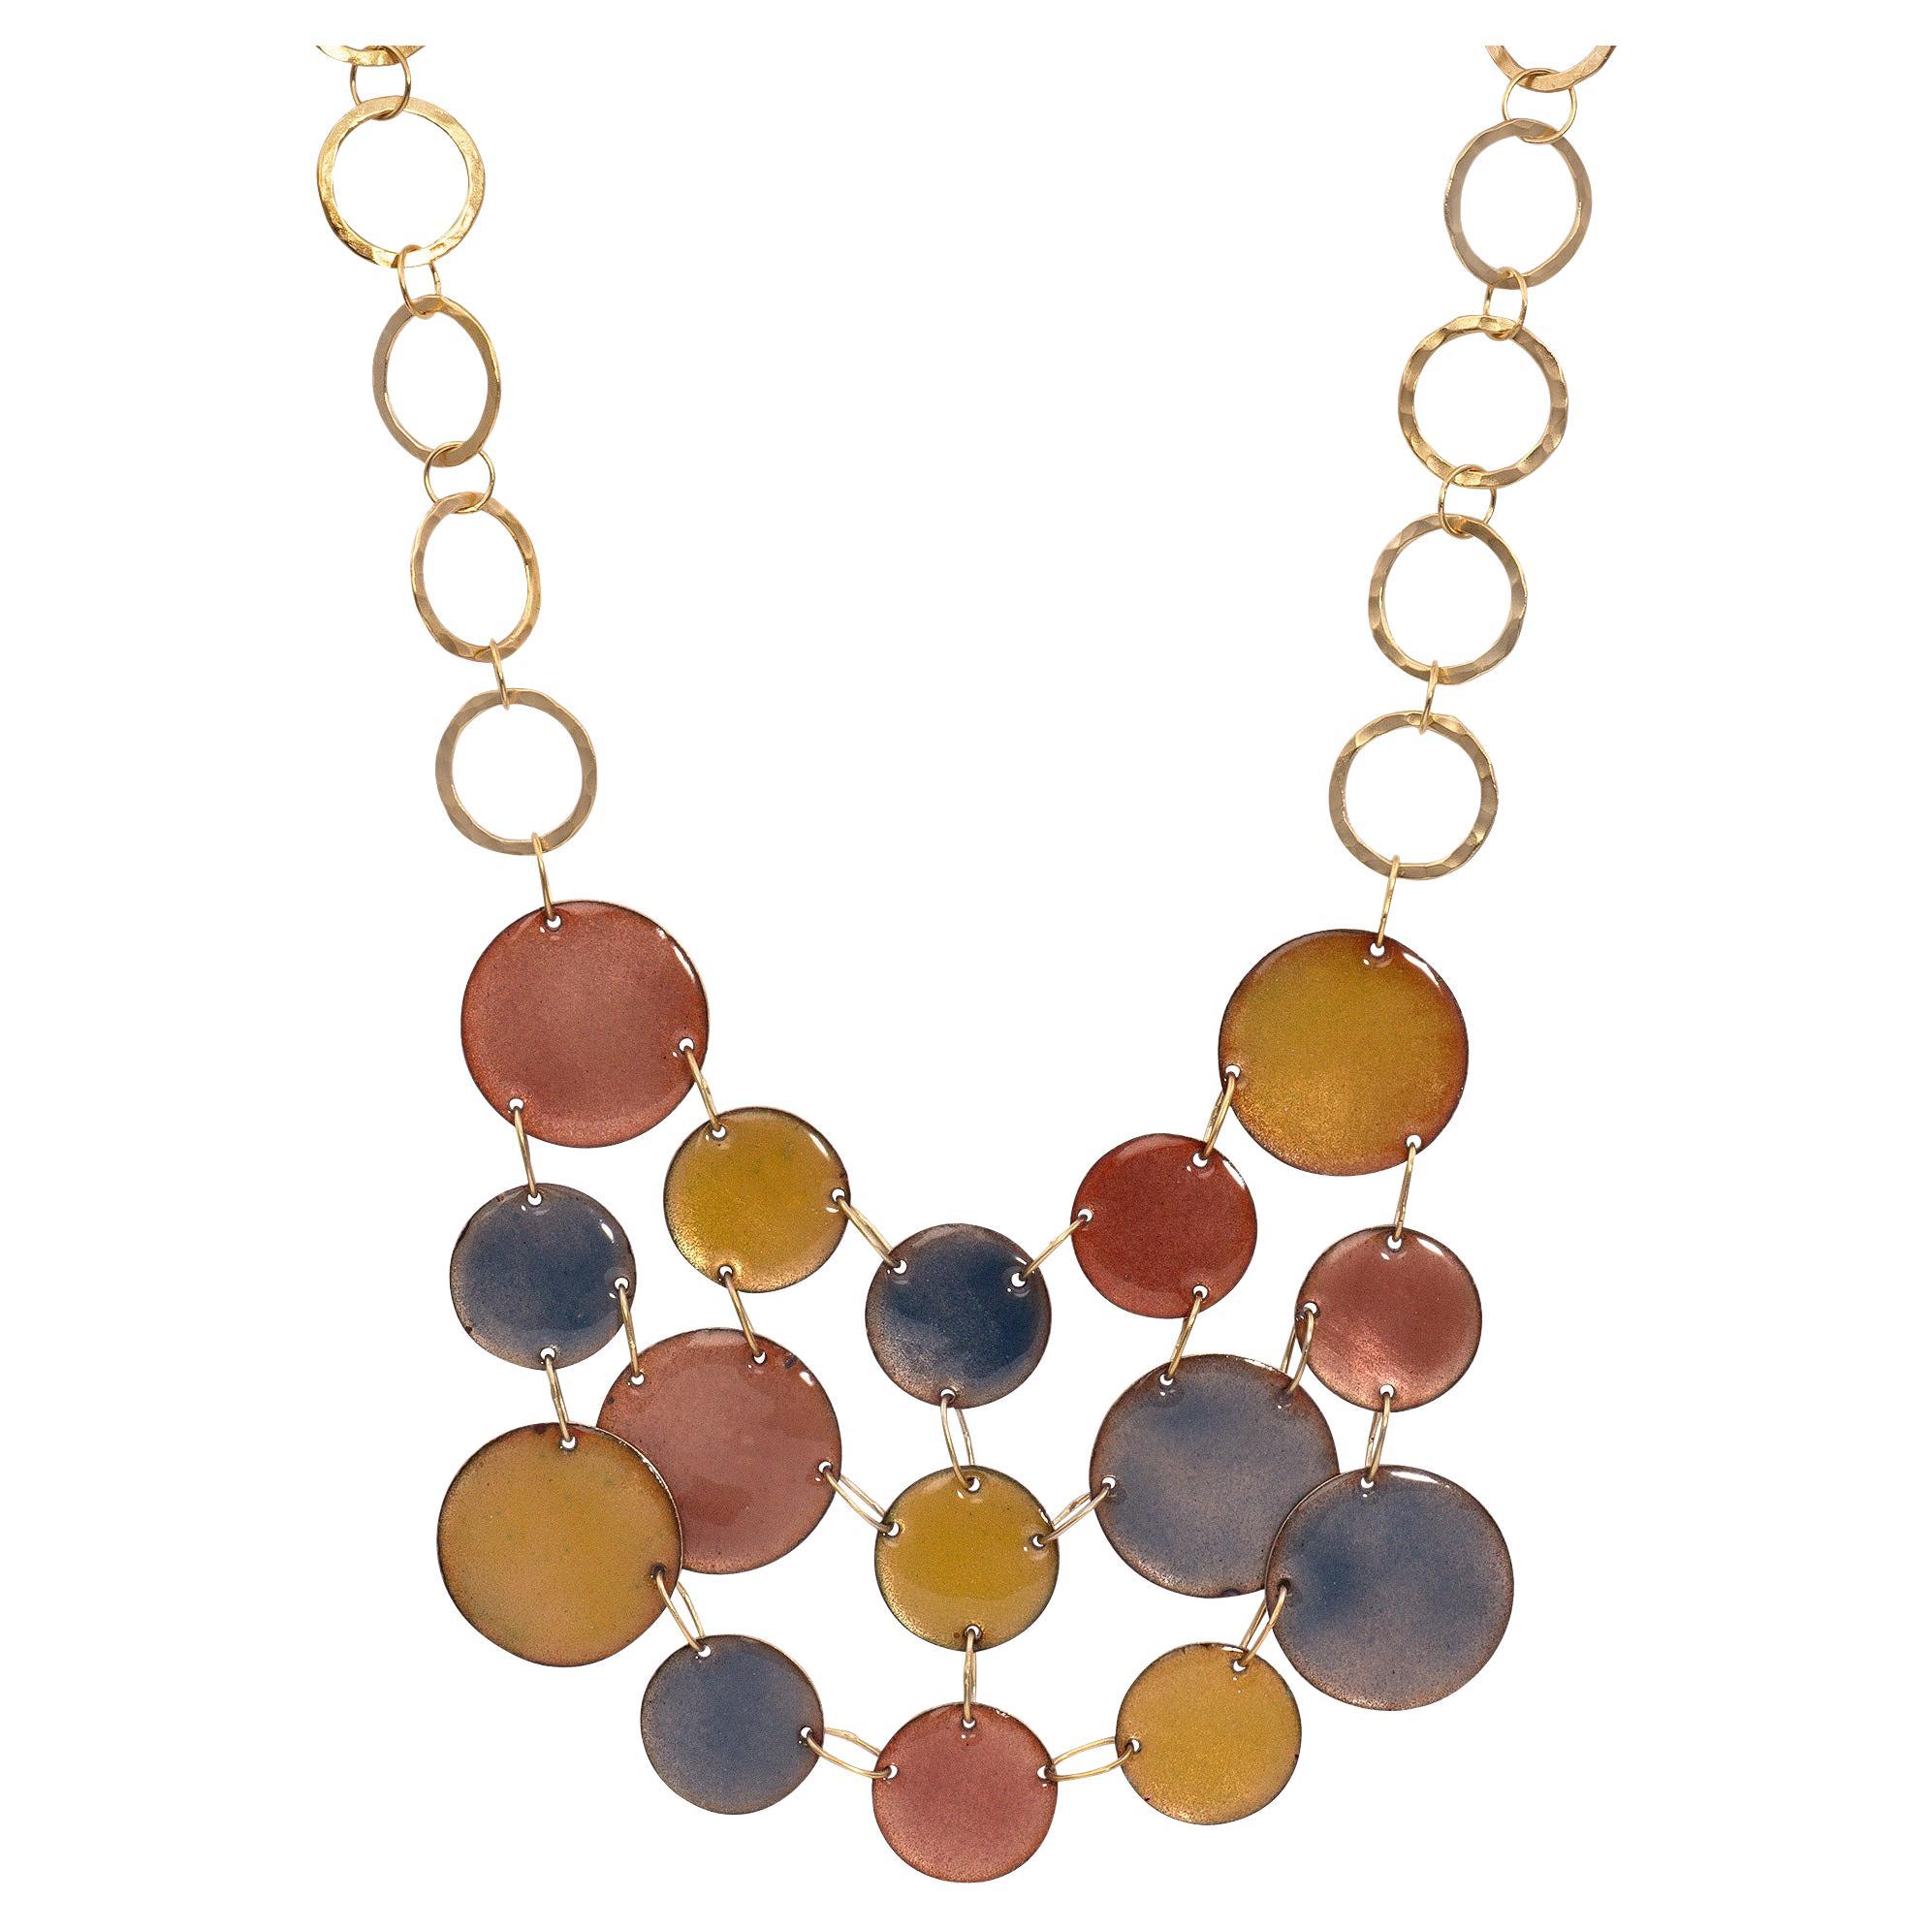 Gold Vermeil multi Hoop Bib Necklace with Hand painted Enamel Discs For Sale